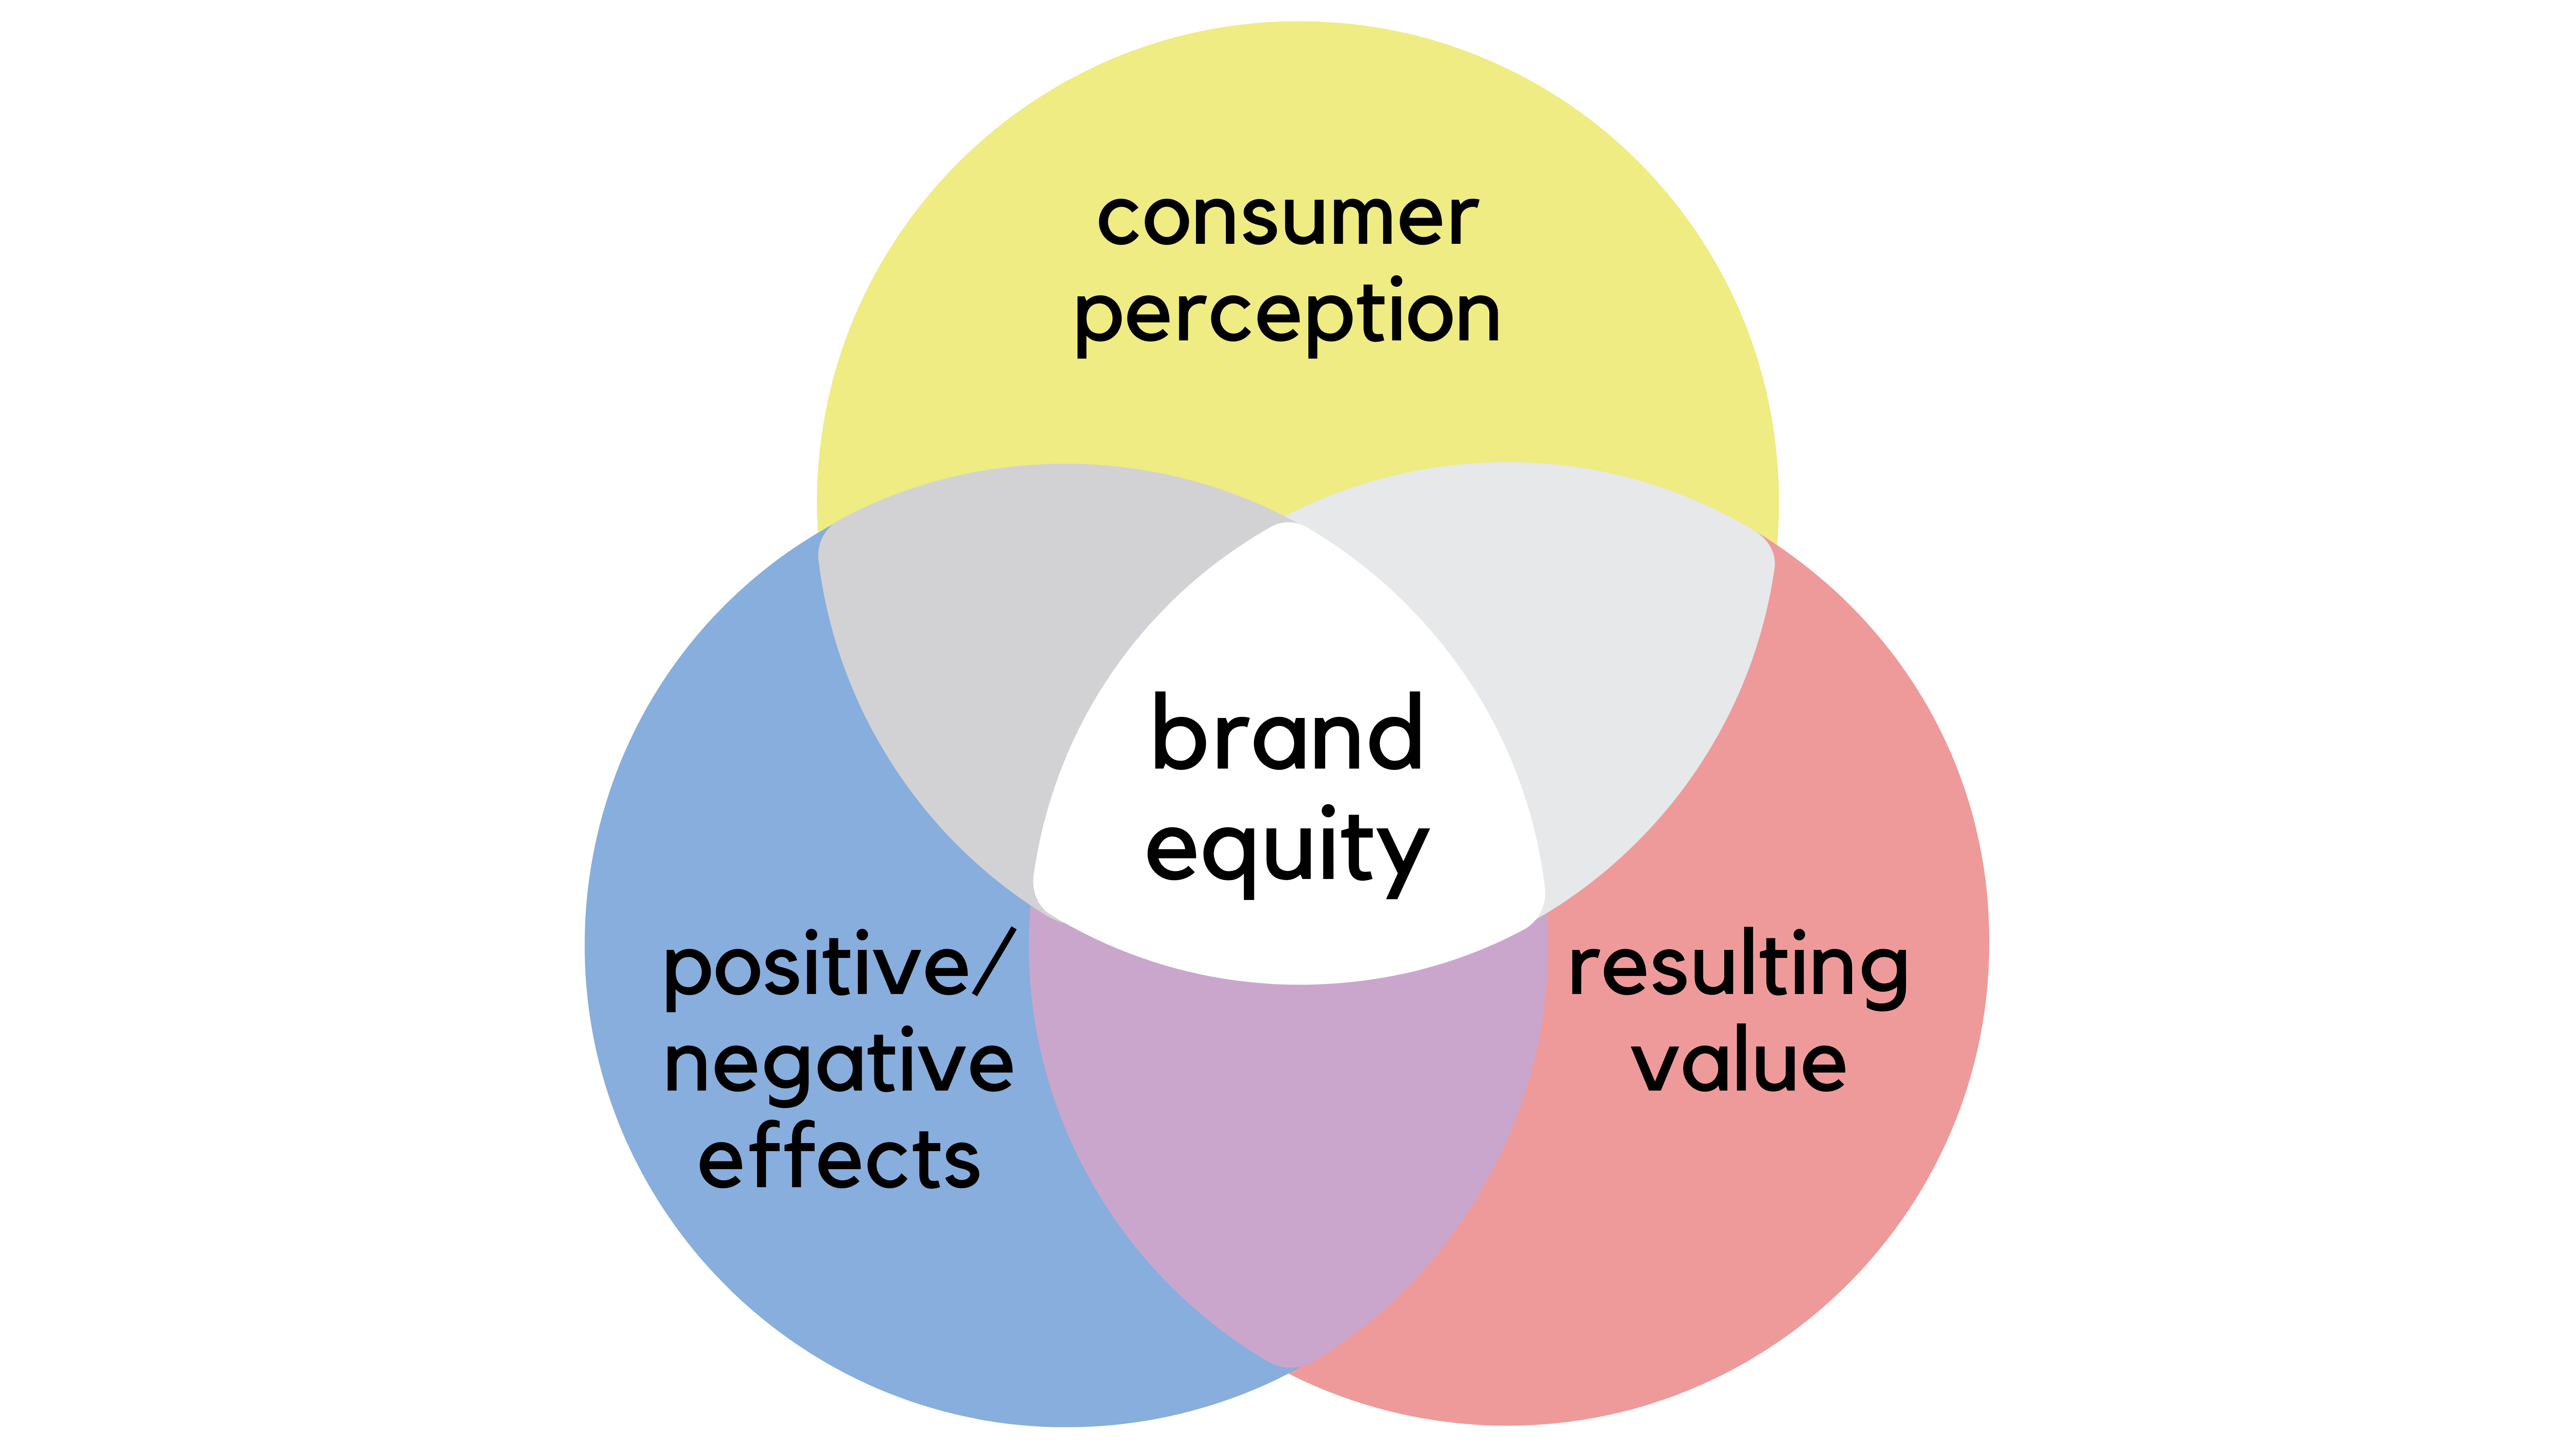 qualitative research techniques of brand equity